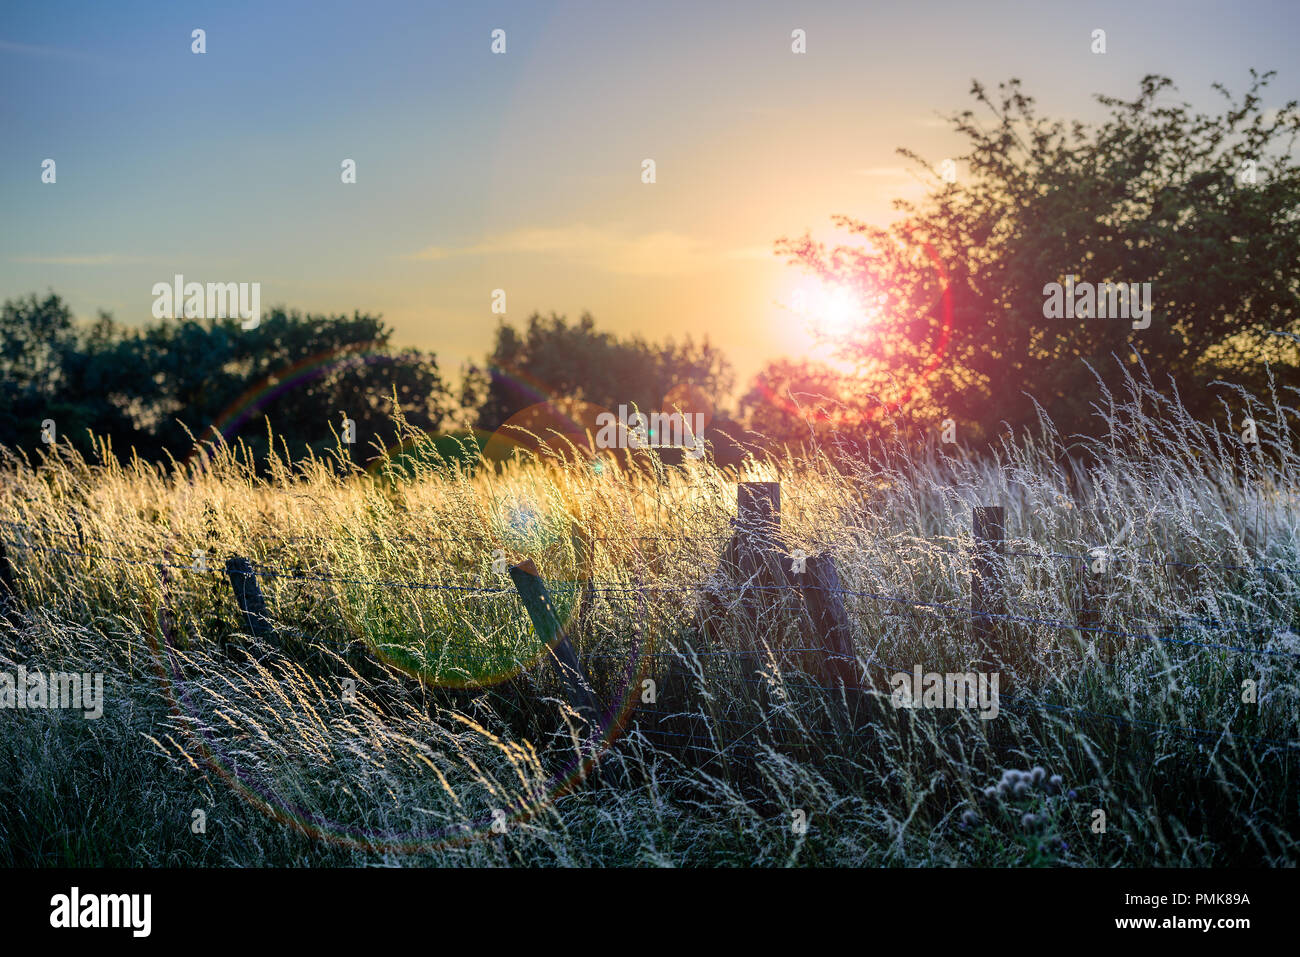 July sun setting through trees causing a path of lens flare with long grass swaying in the light breeze Stock Photo